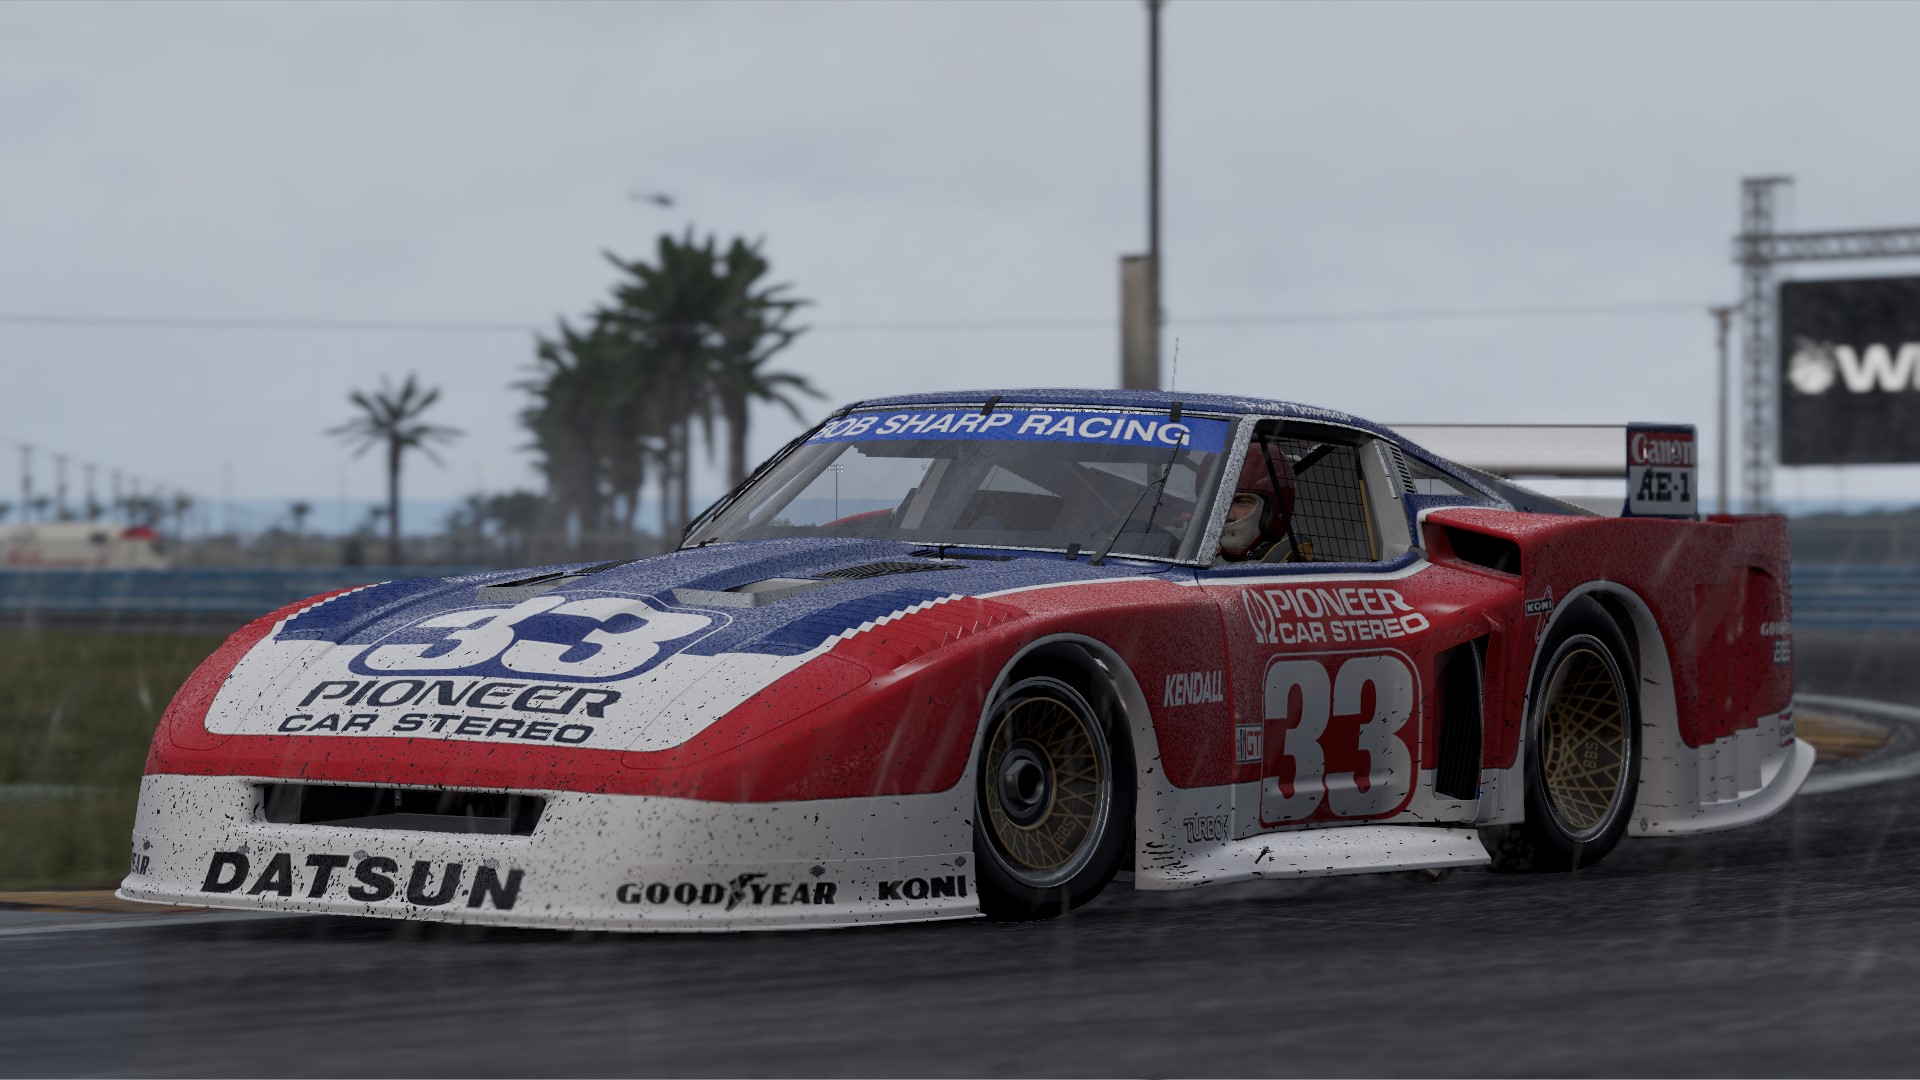 project cars 2 image